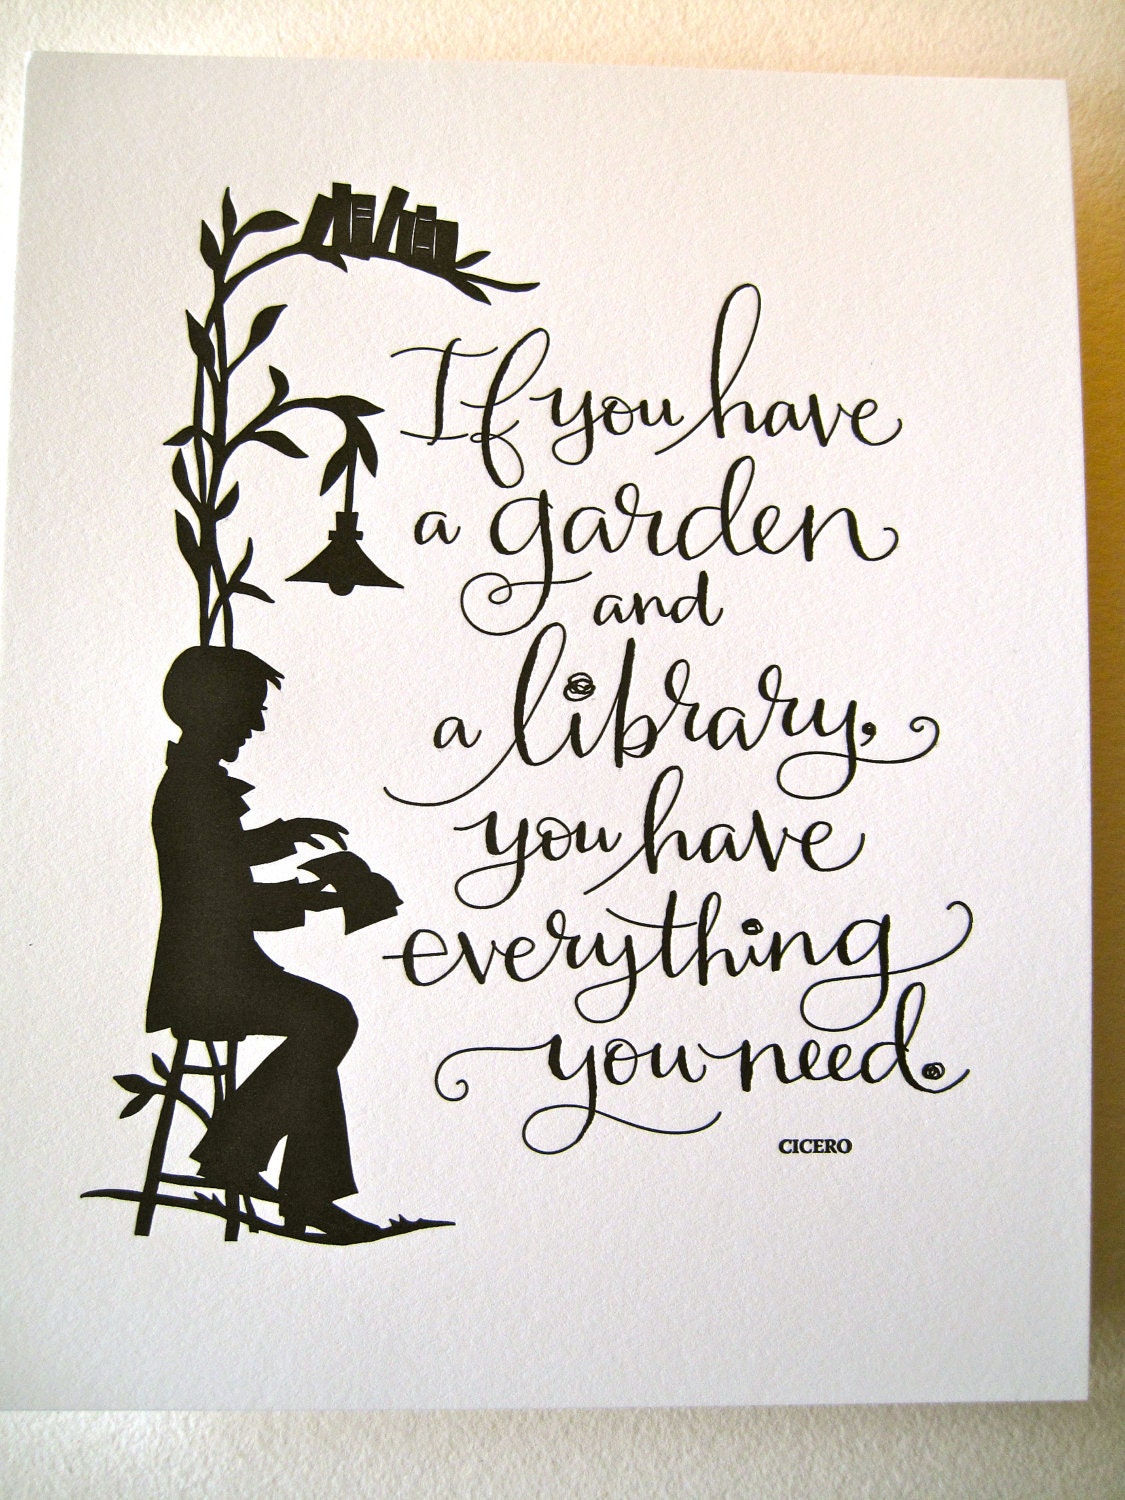 LETTERPRESS ART PRINT- If you have a garden and a library, you have everything you need.Cicero - tagteamtompkins